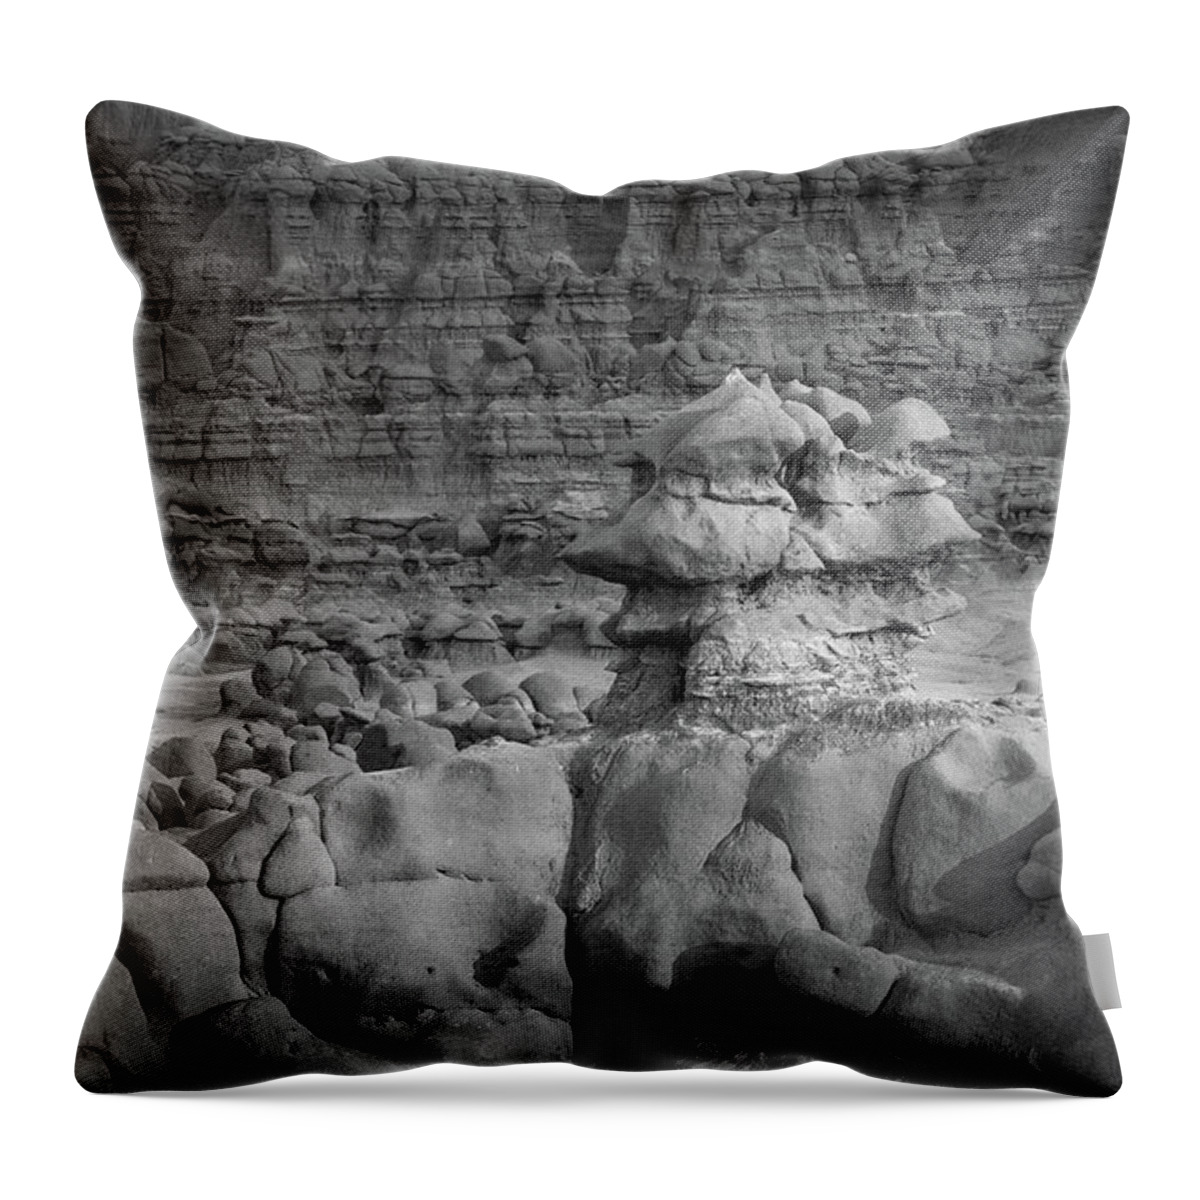 Alien Throw Pillow featuring the photograph Rocky Desert Formation by Kyle Lee